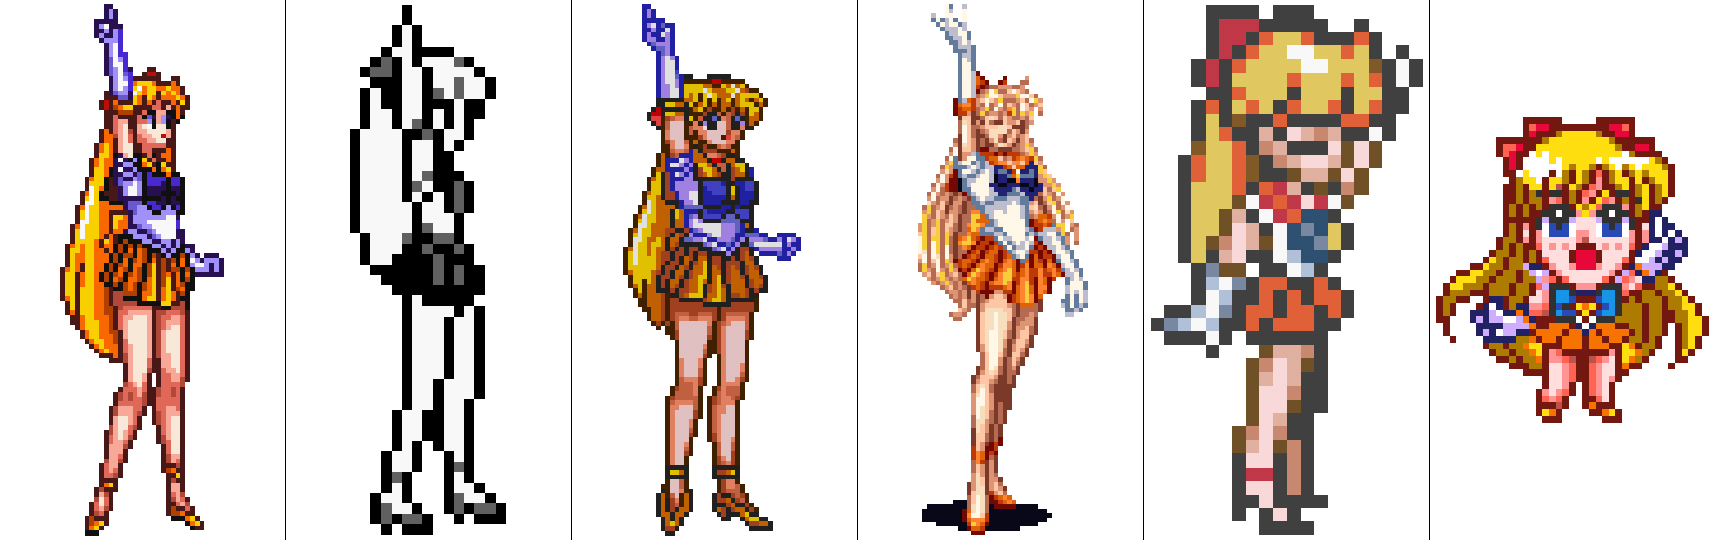 The Sailor Scouts Don’t Look Half Bad As Retro Game Sprites